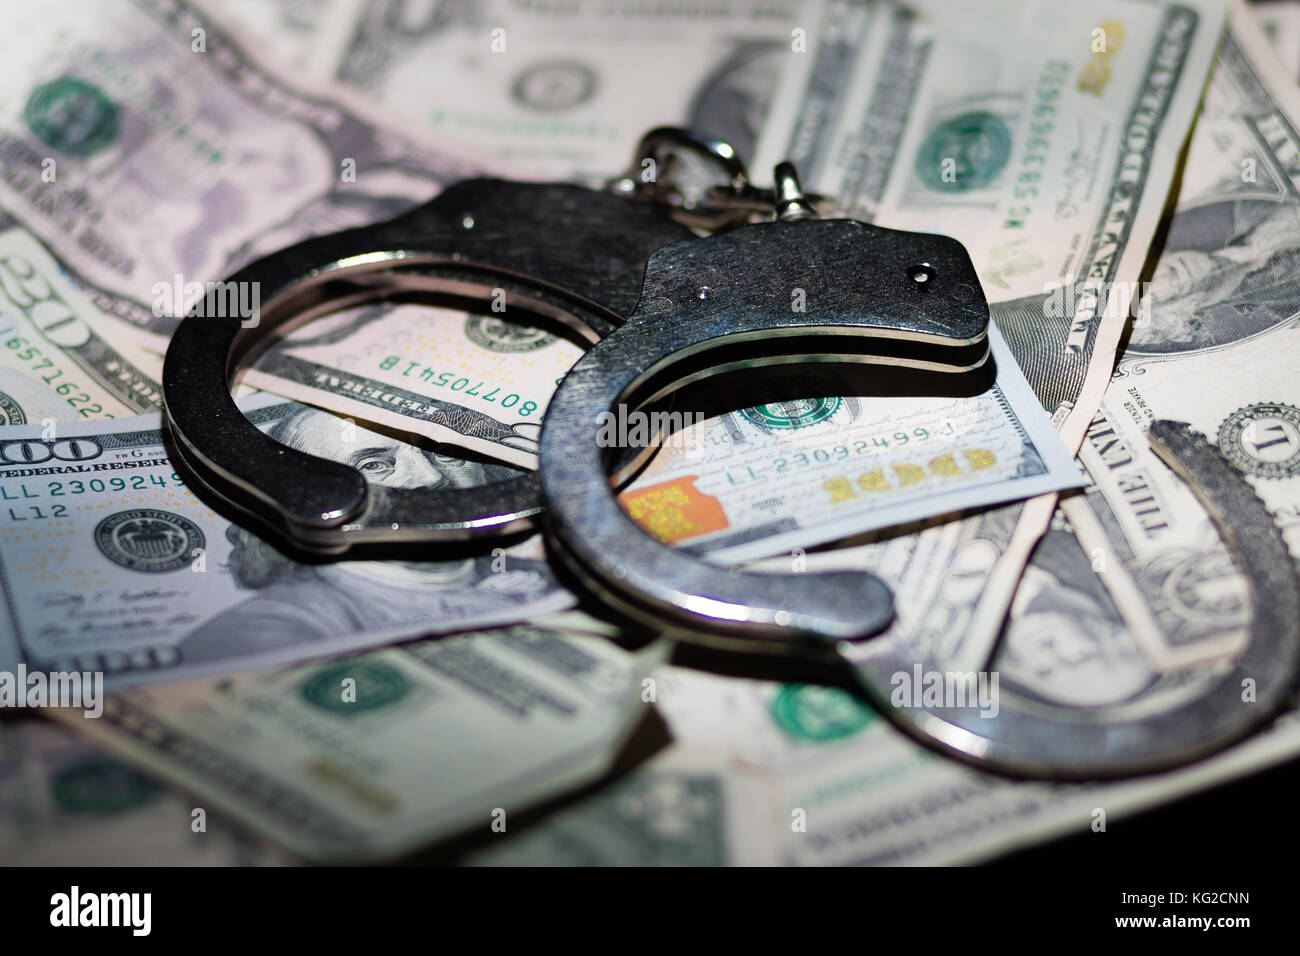 A pair of open handcuffs on a pile of American Dollars. Stock Photo